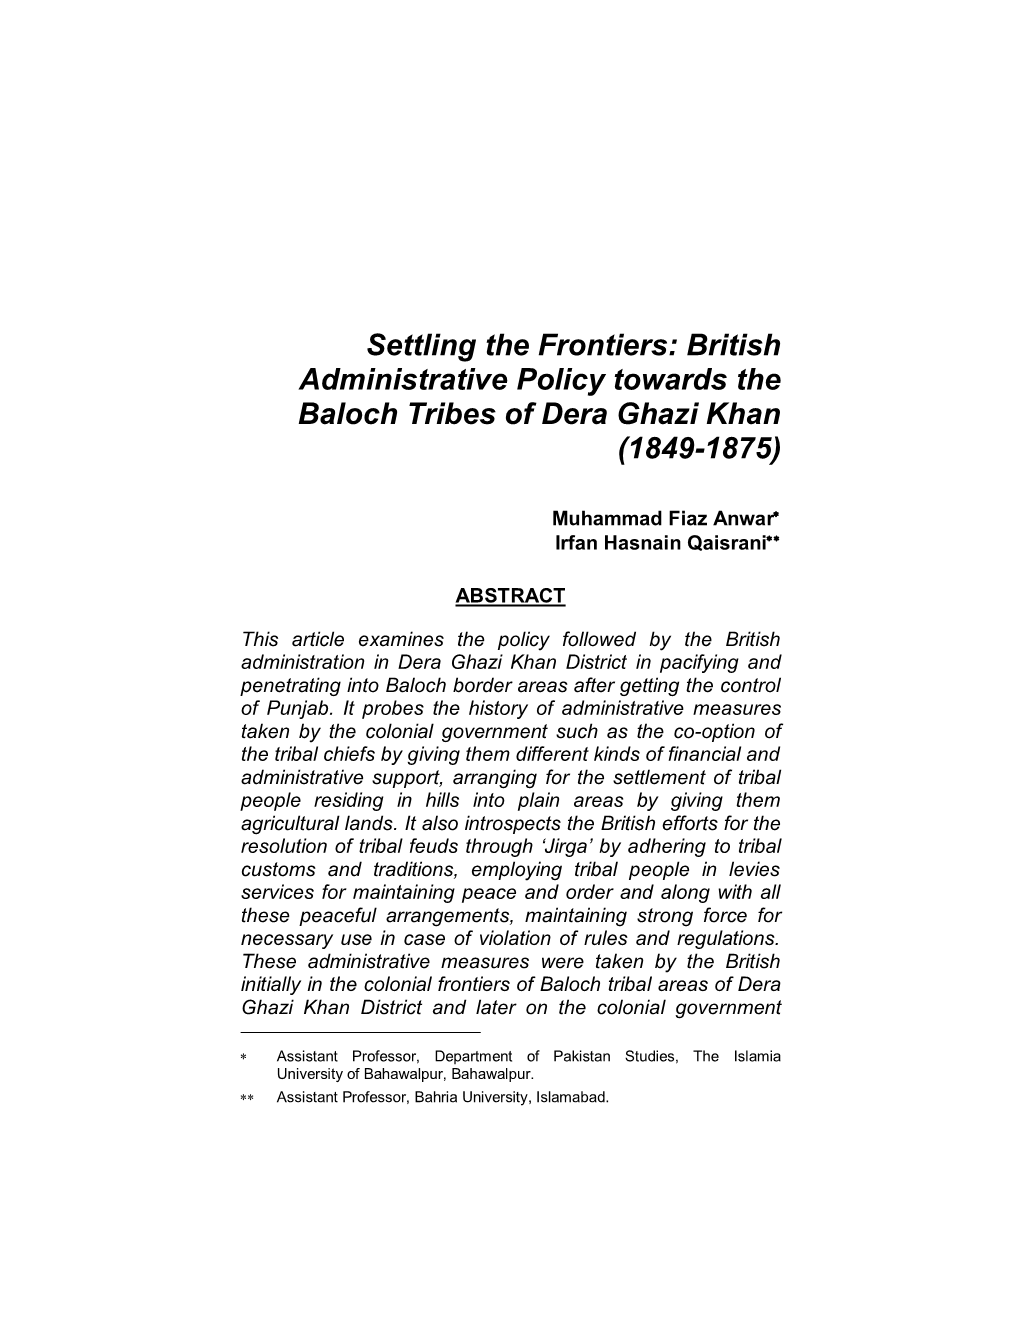 British Administrative Policy Towards the Baloch Tribes of Dera Ghazi Khan (1849-1875)